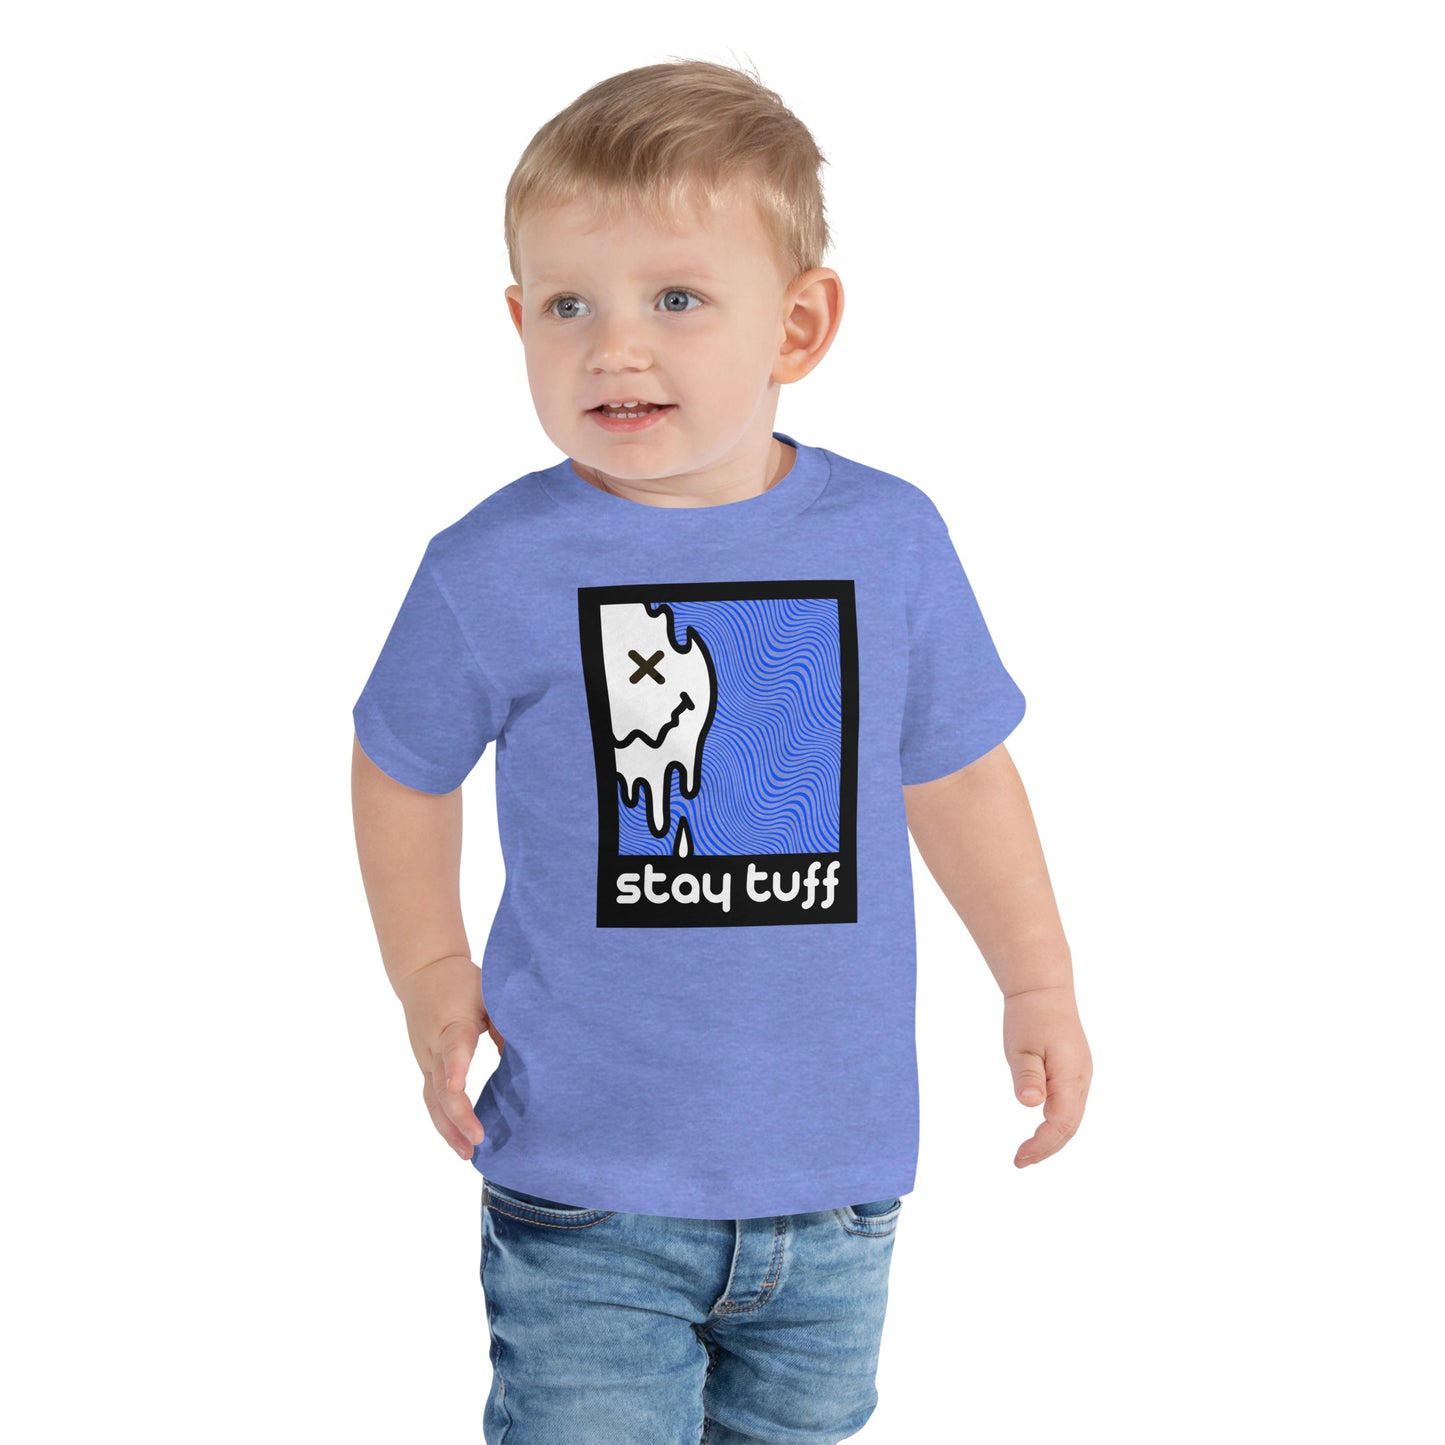 GOOD WILL PREVAIL (Toddler Tee)